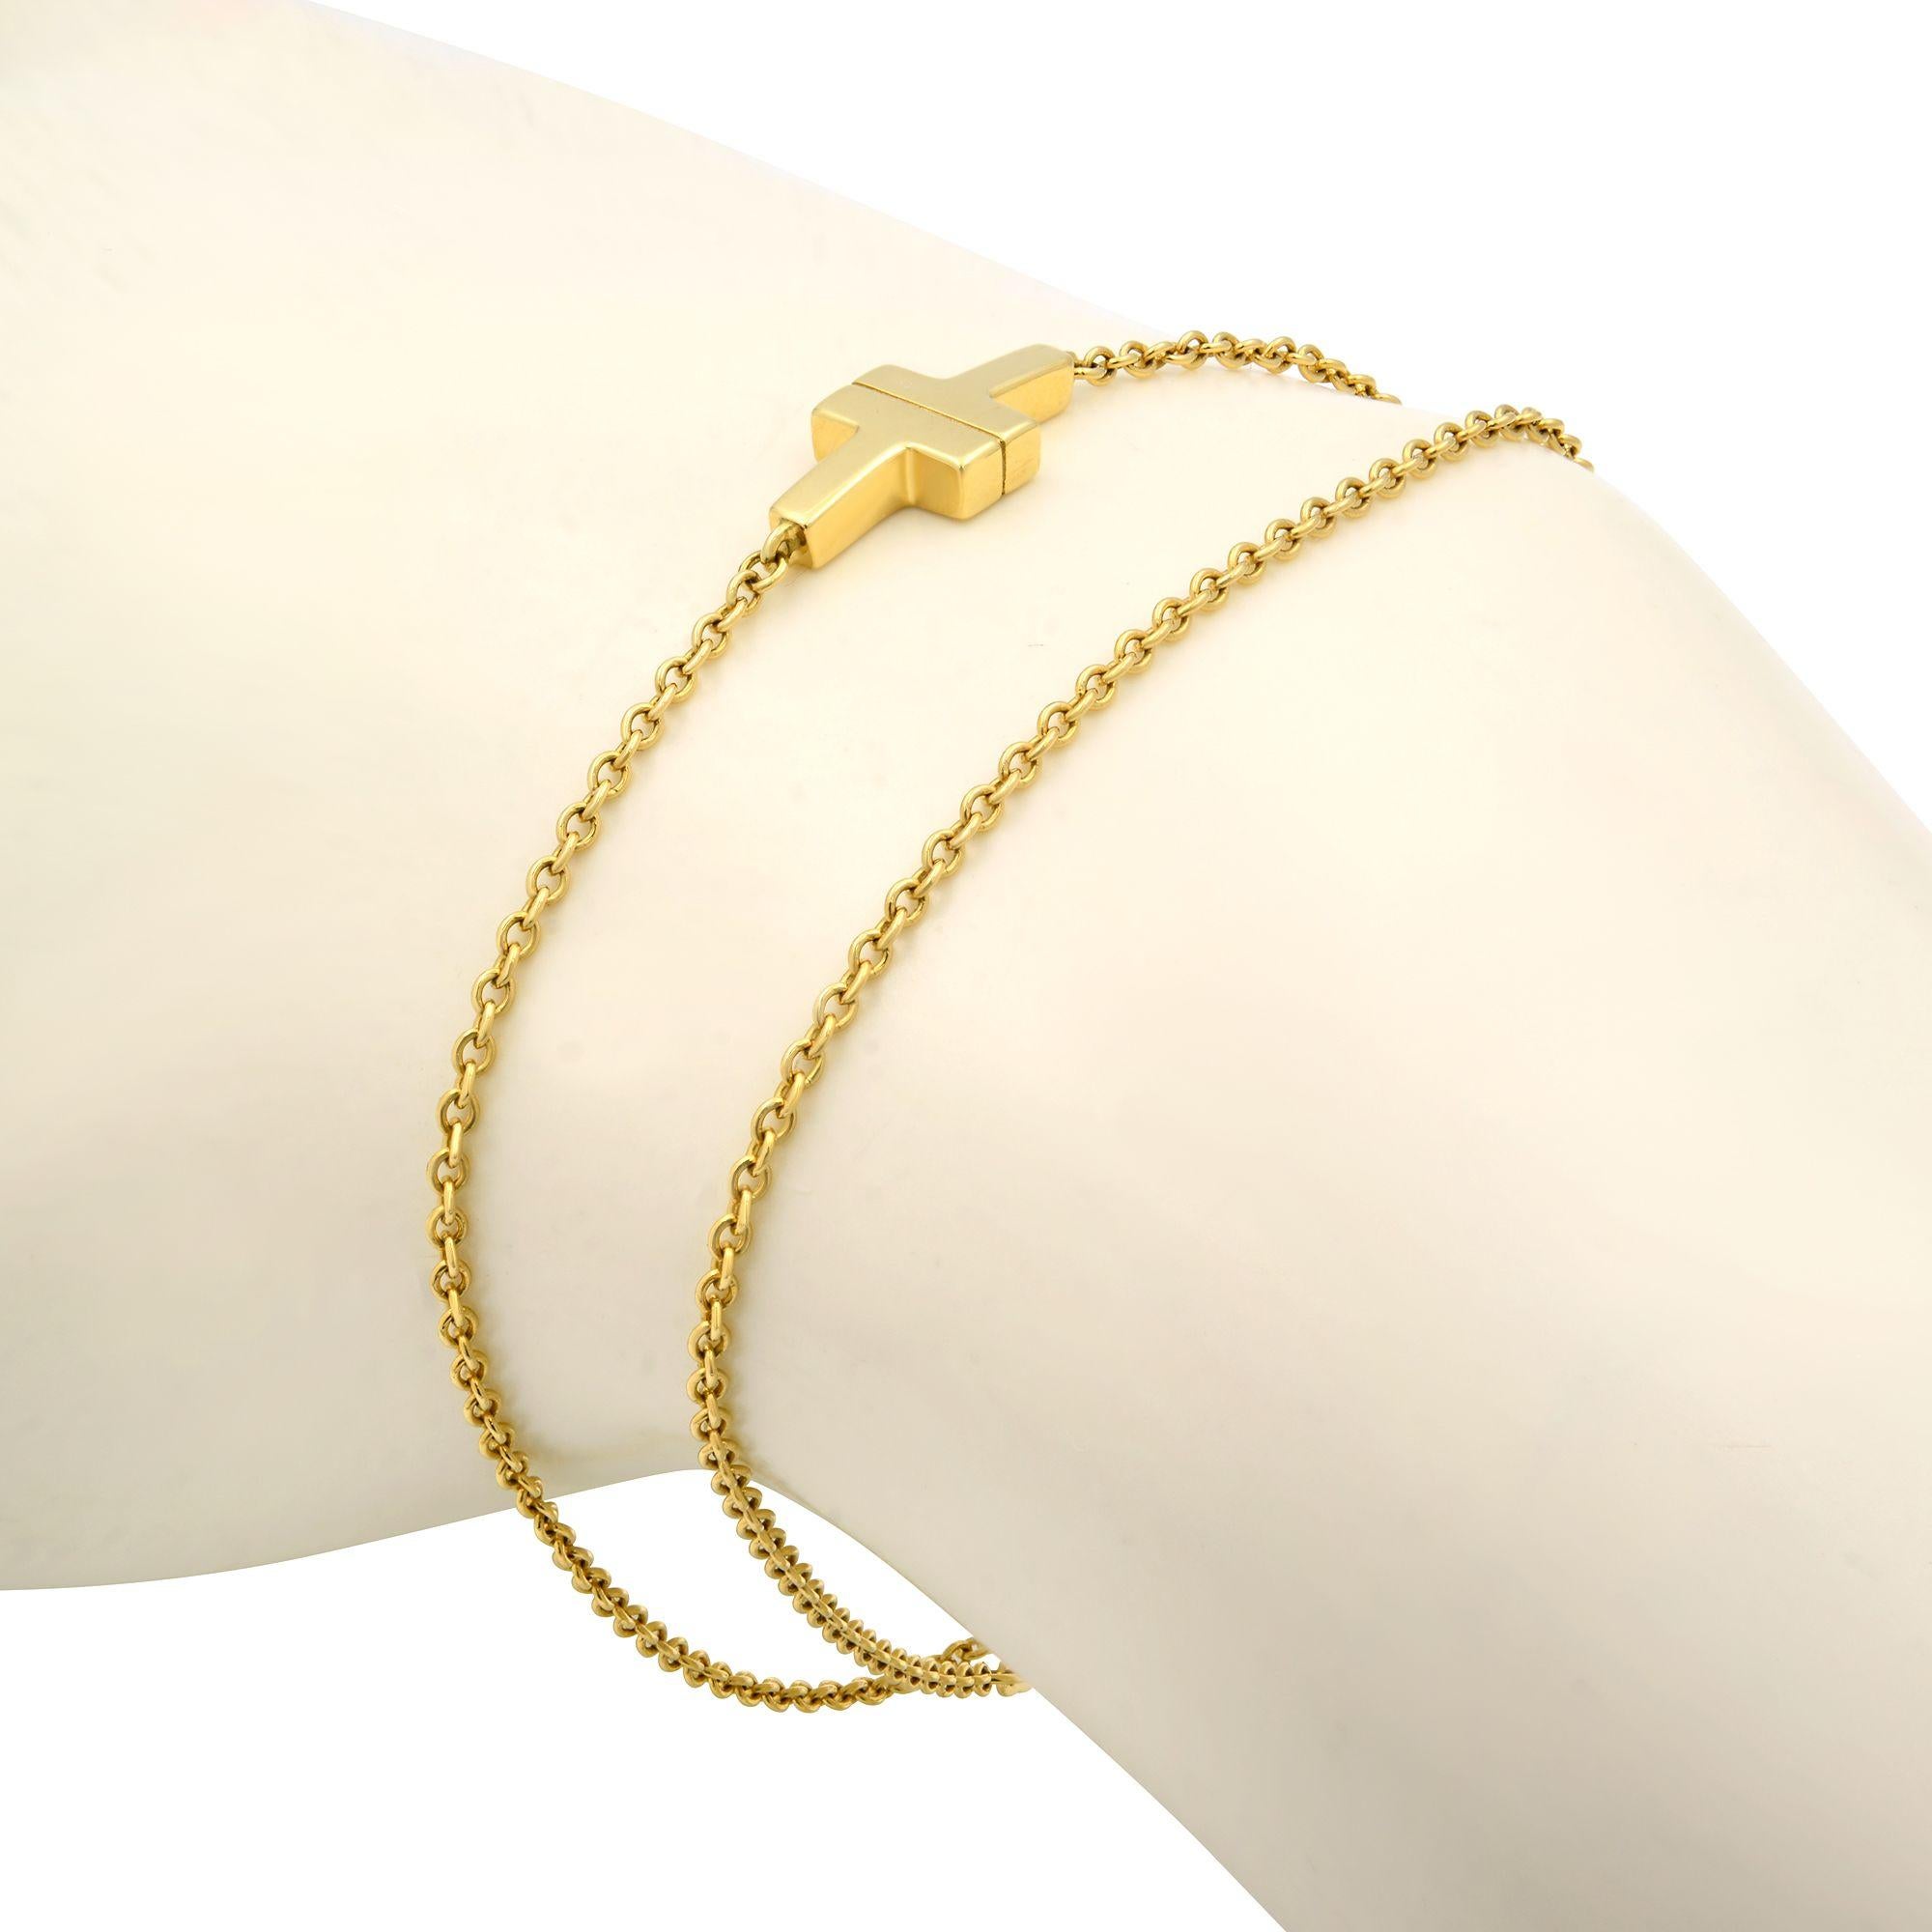 This bracelet's delicate double chains are an elegant contrast to the bold center motif. The Tiffany T collection is a tangible reminder of the connections we feel but can't always see. Wear this bracelet with other timeless Tiffany T designs for a